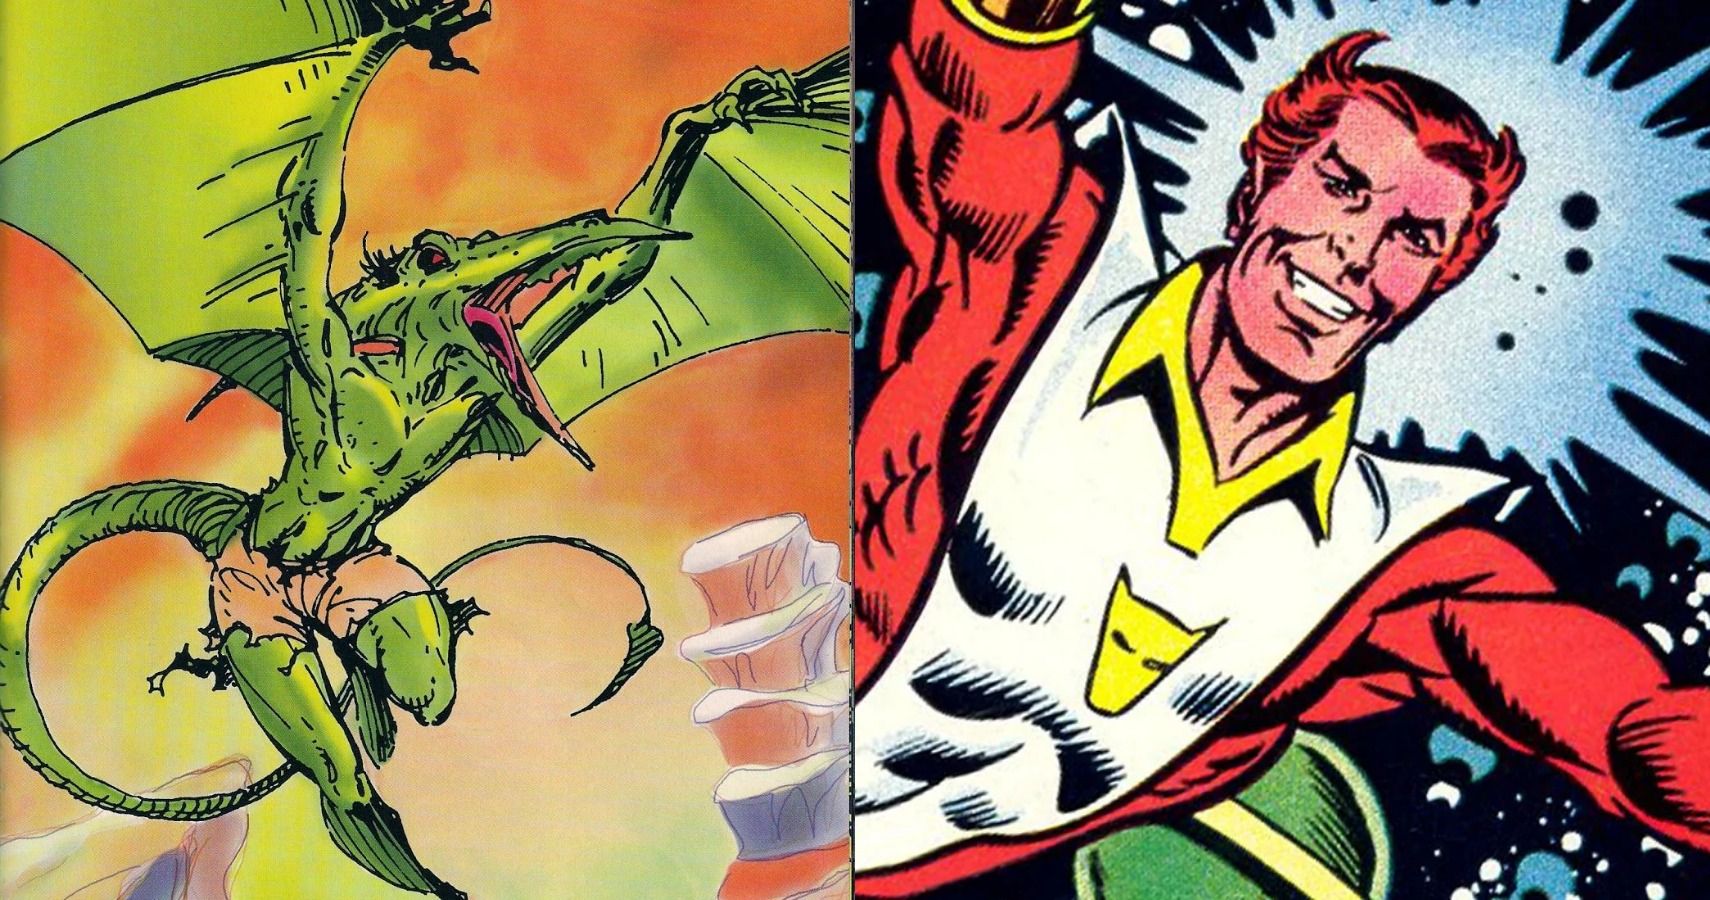 Marvel's Eternals: 10 Things Only Comic Book Fans Know About Eros/Starfox